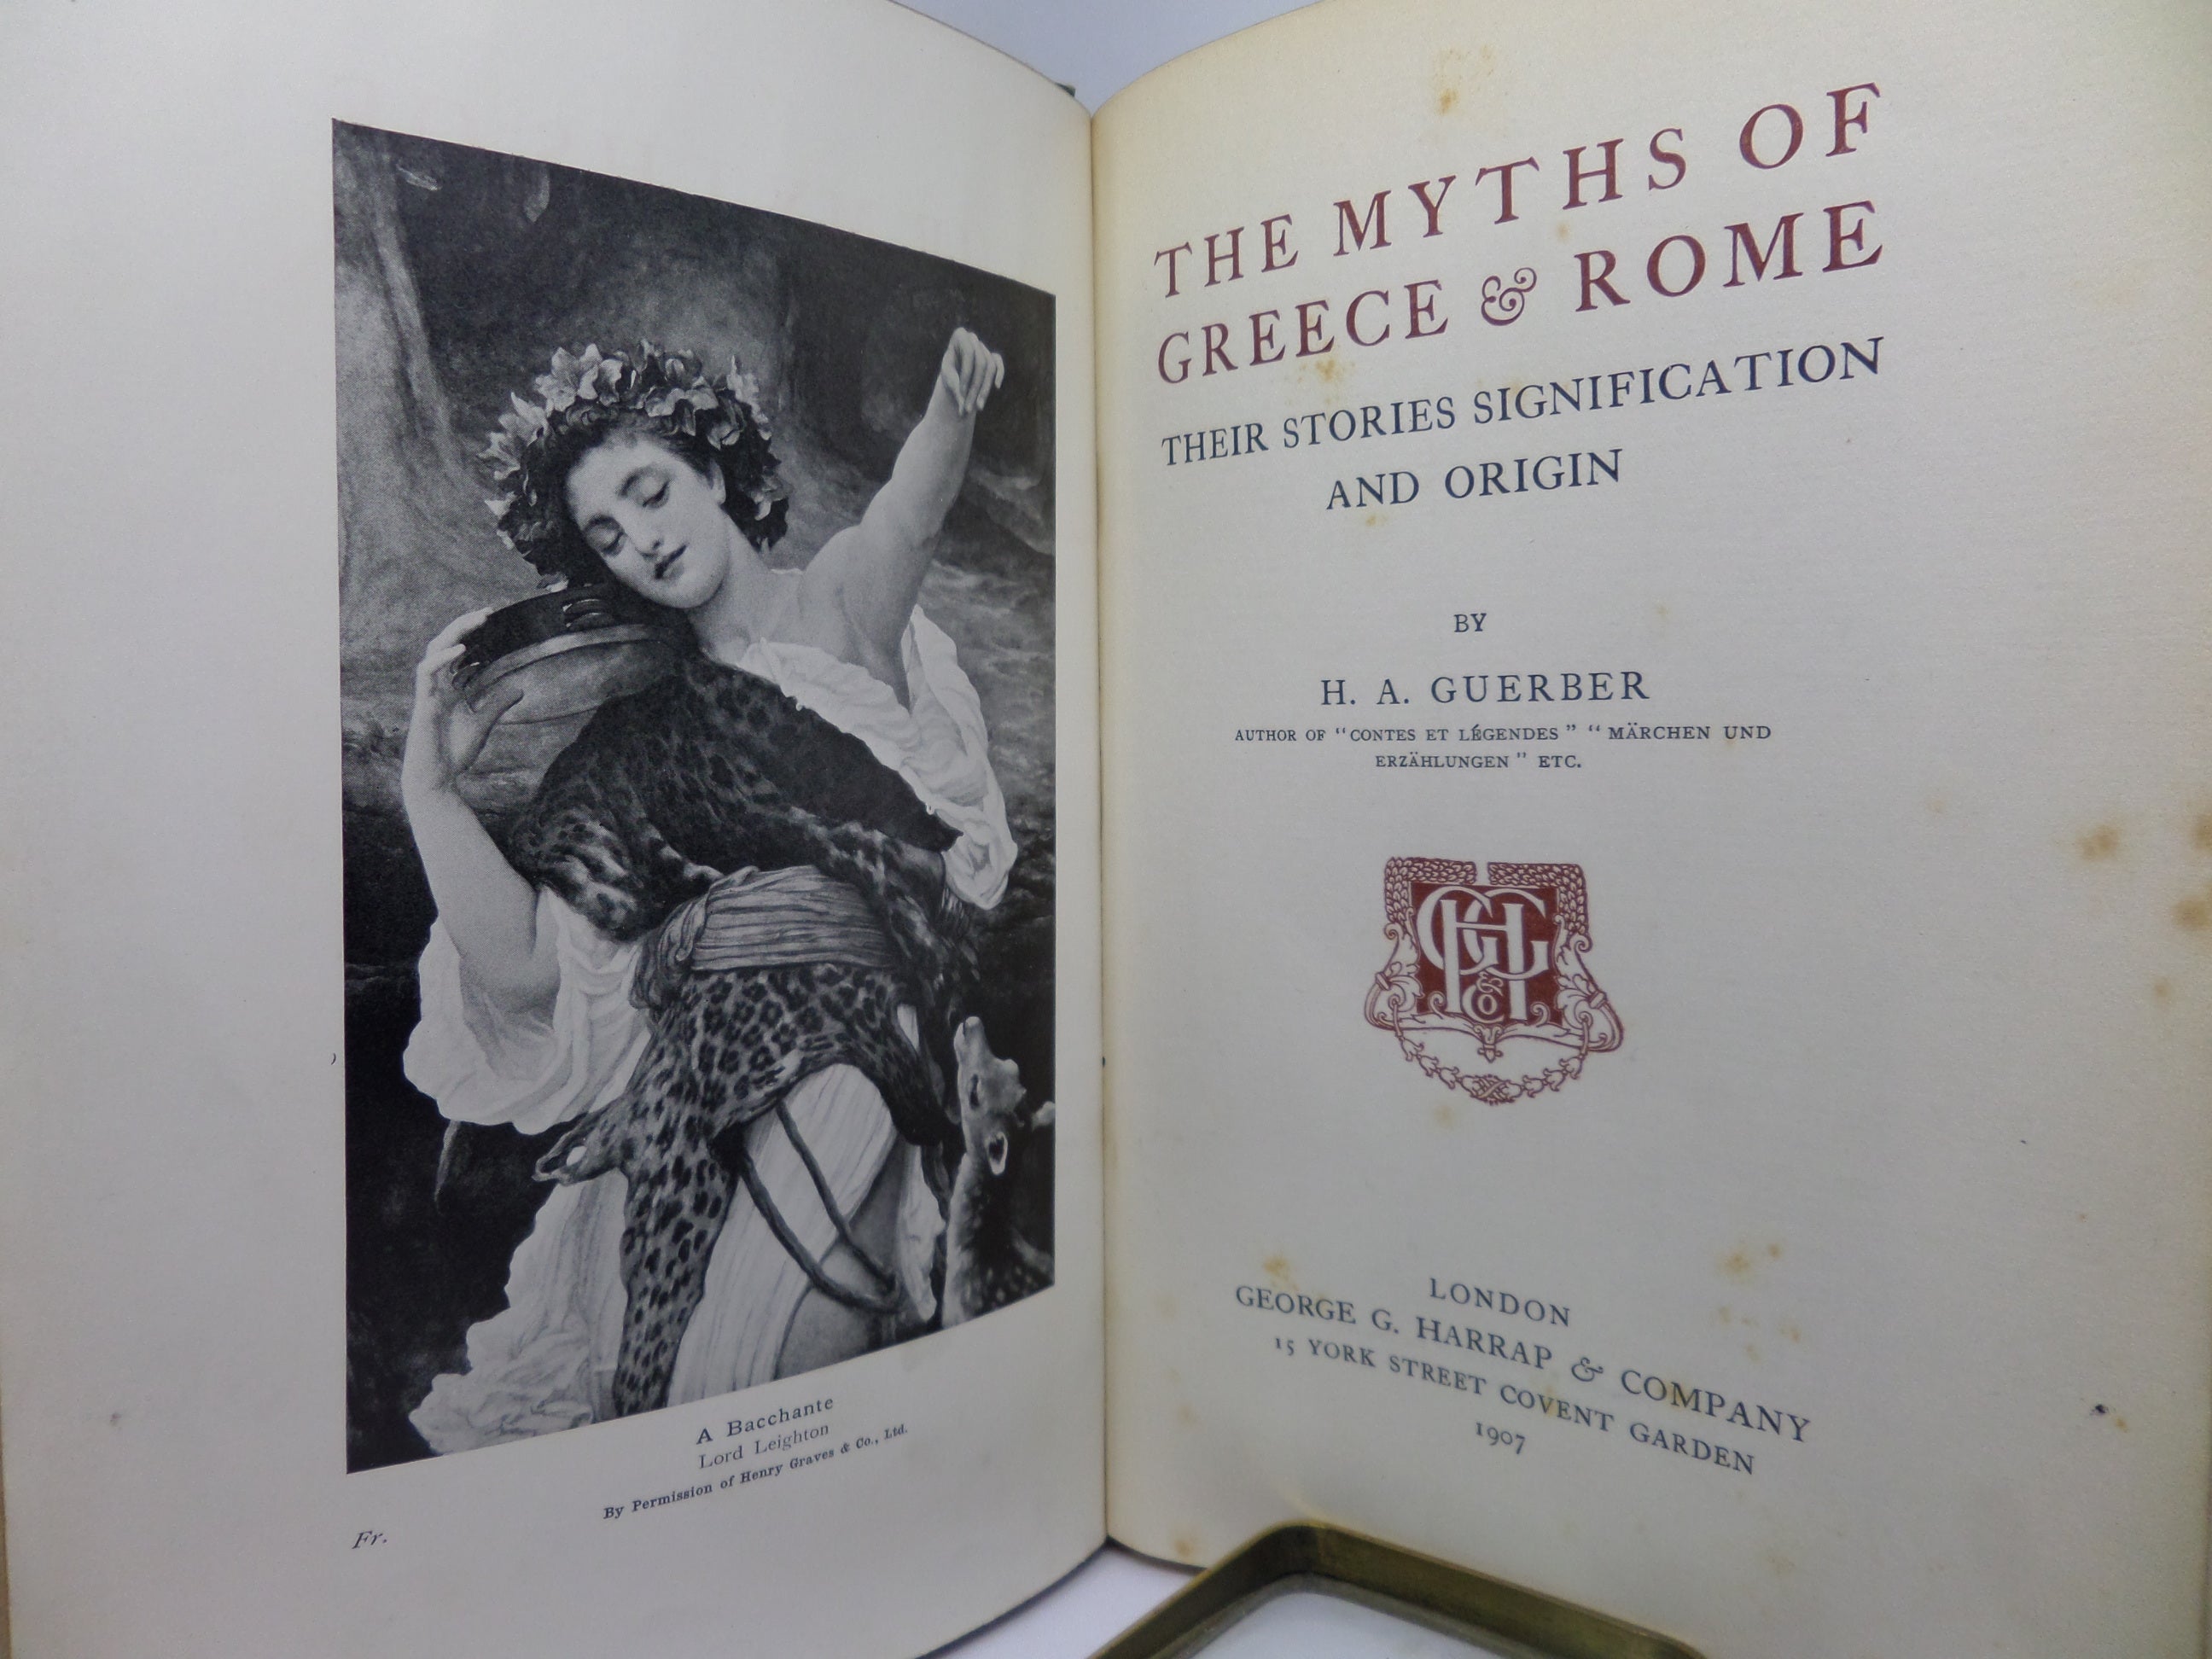 THE MYTHS OF GREECE & ROME BY H. A. GUERBER 1907 FIRST EDITION, ILLUSTRATED